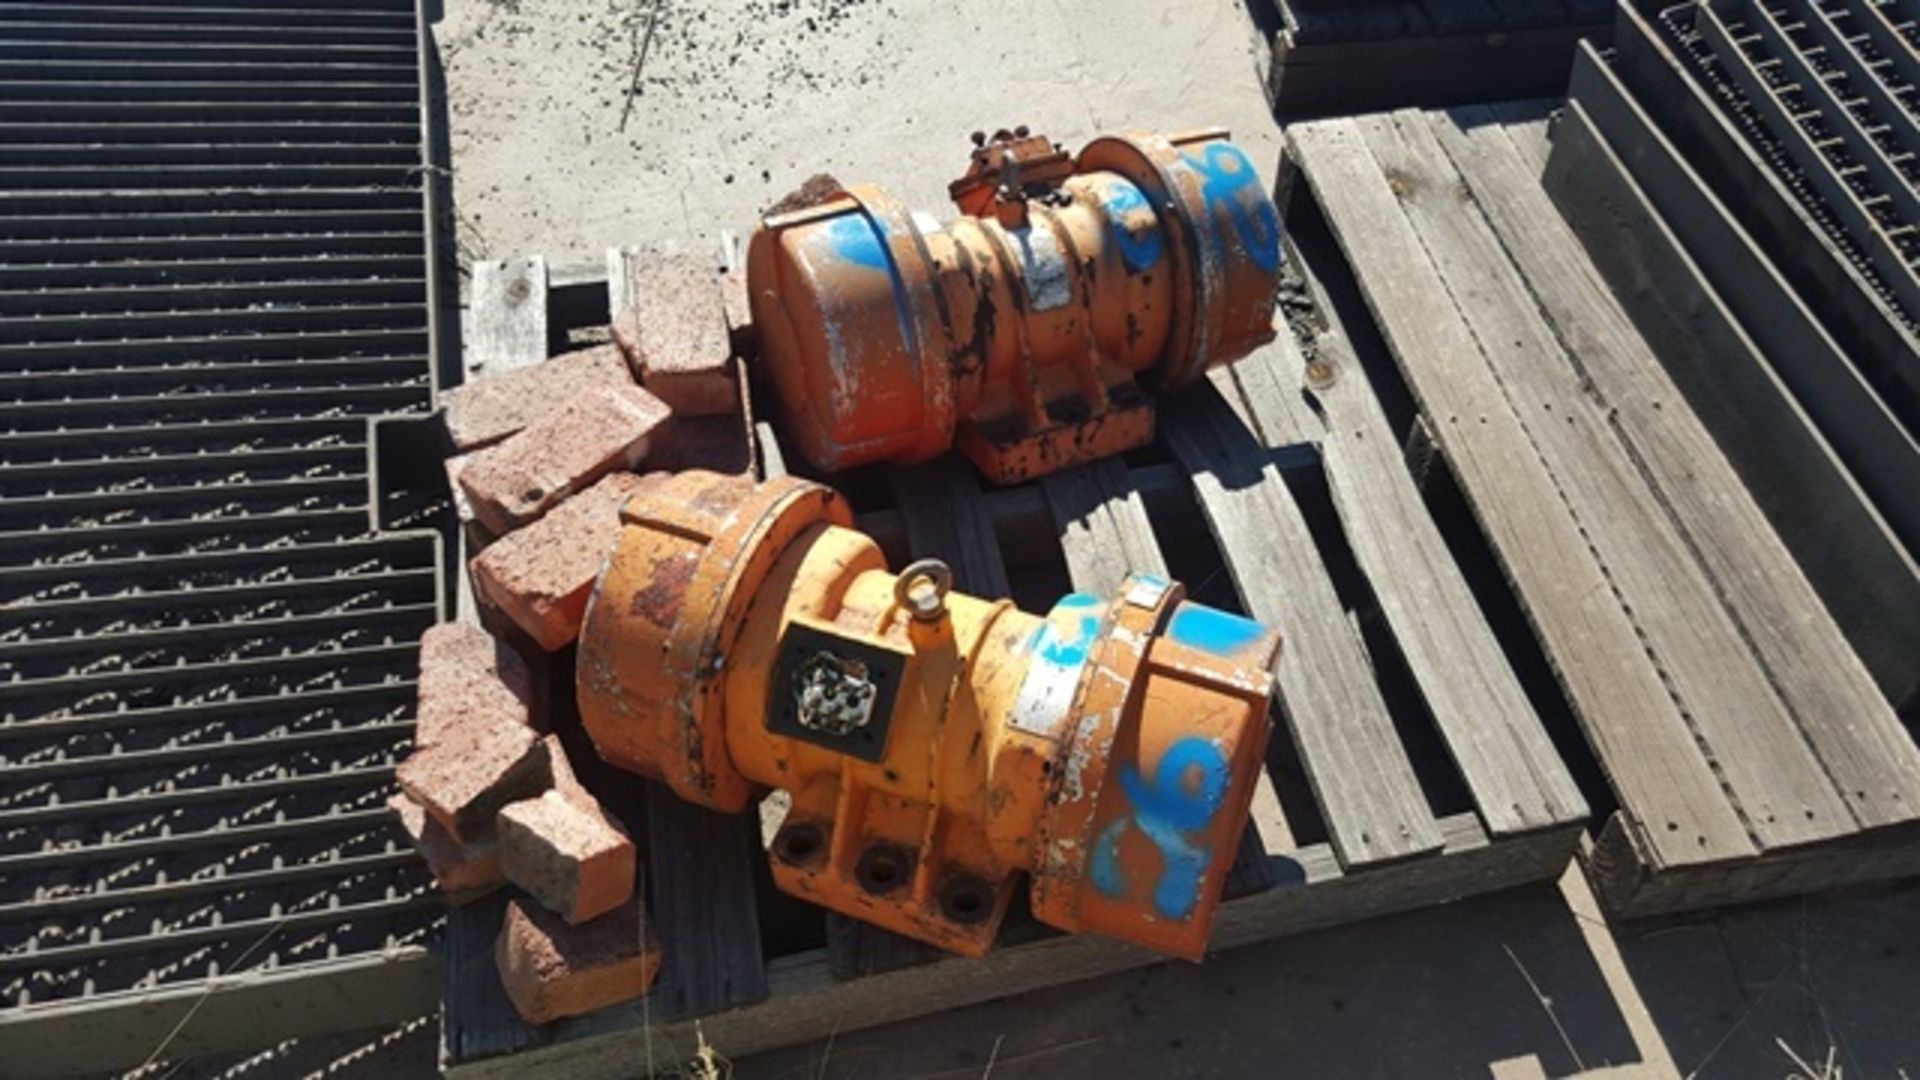 2 X 1.25KW VIBRATING MOTORS - TO BE SOLD AS ONE LOT (LOCATED IN HOTAZEL, NC)